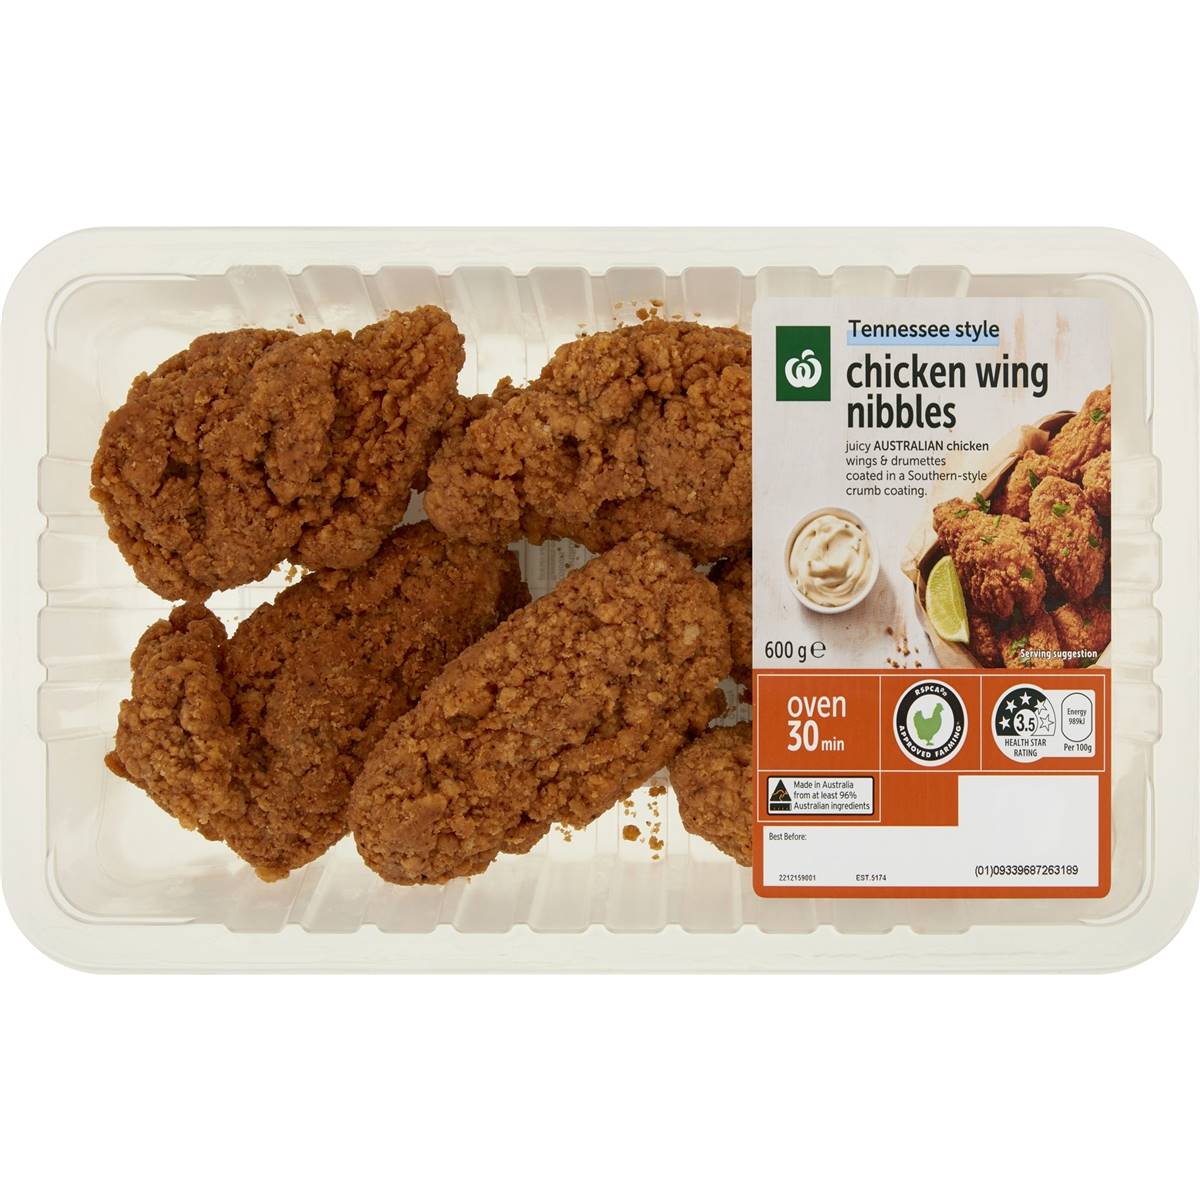 Calories in Woolworths Buttermilk Tennessee Style Chicken Wing Nibbles